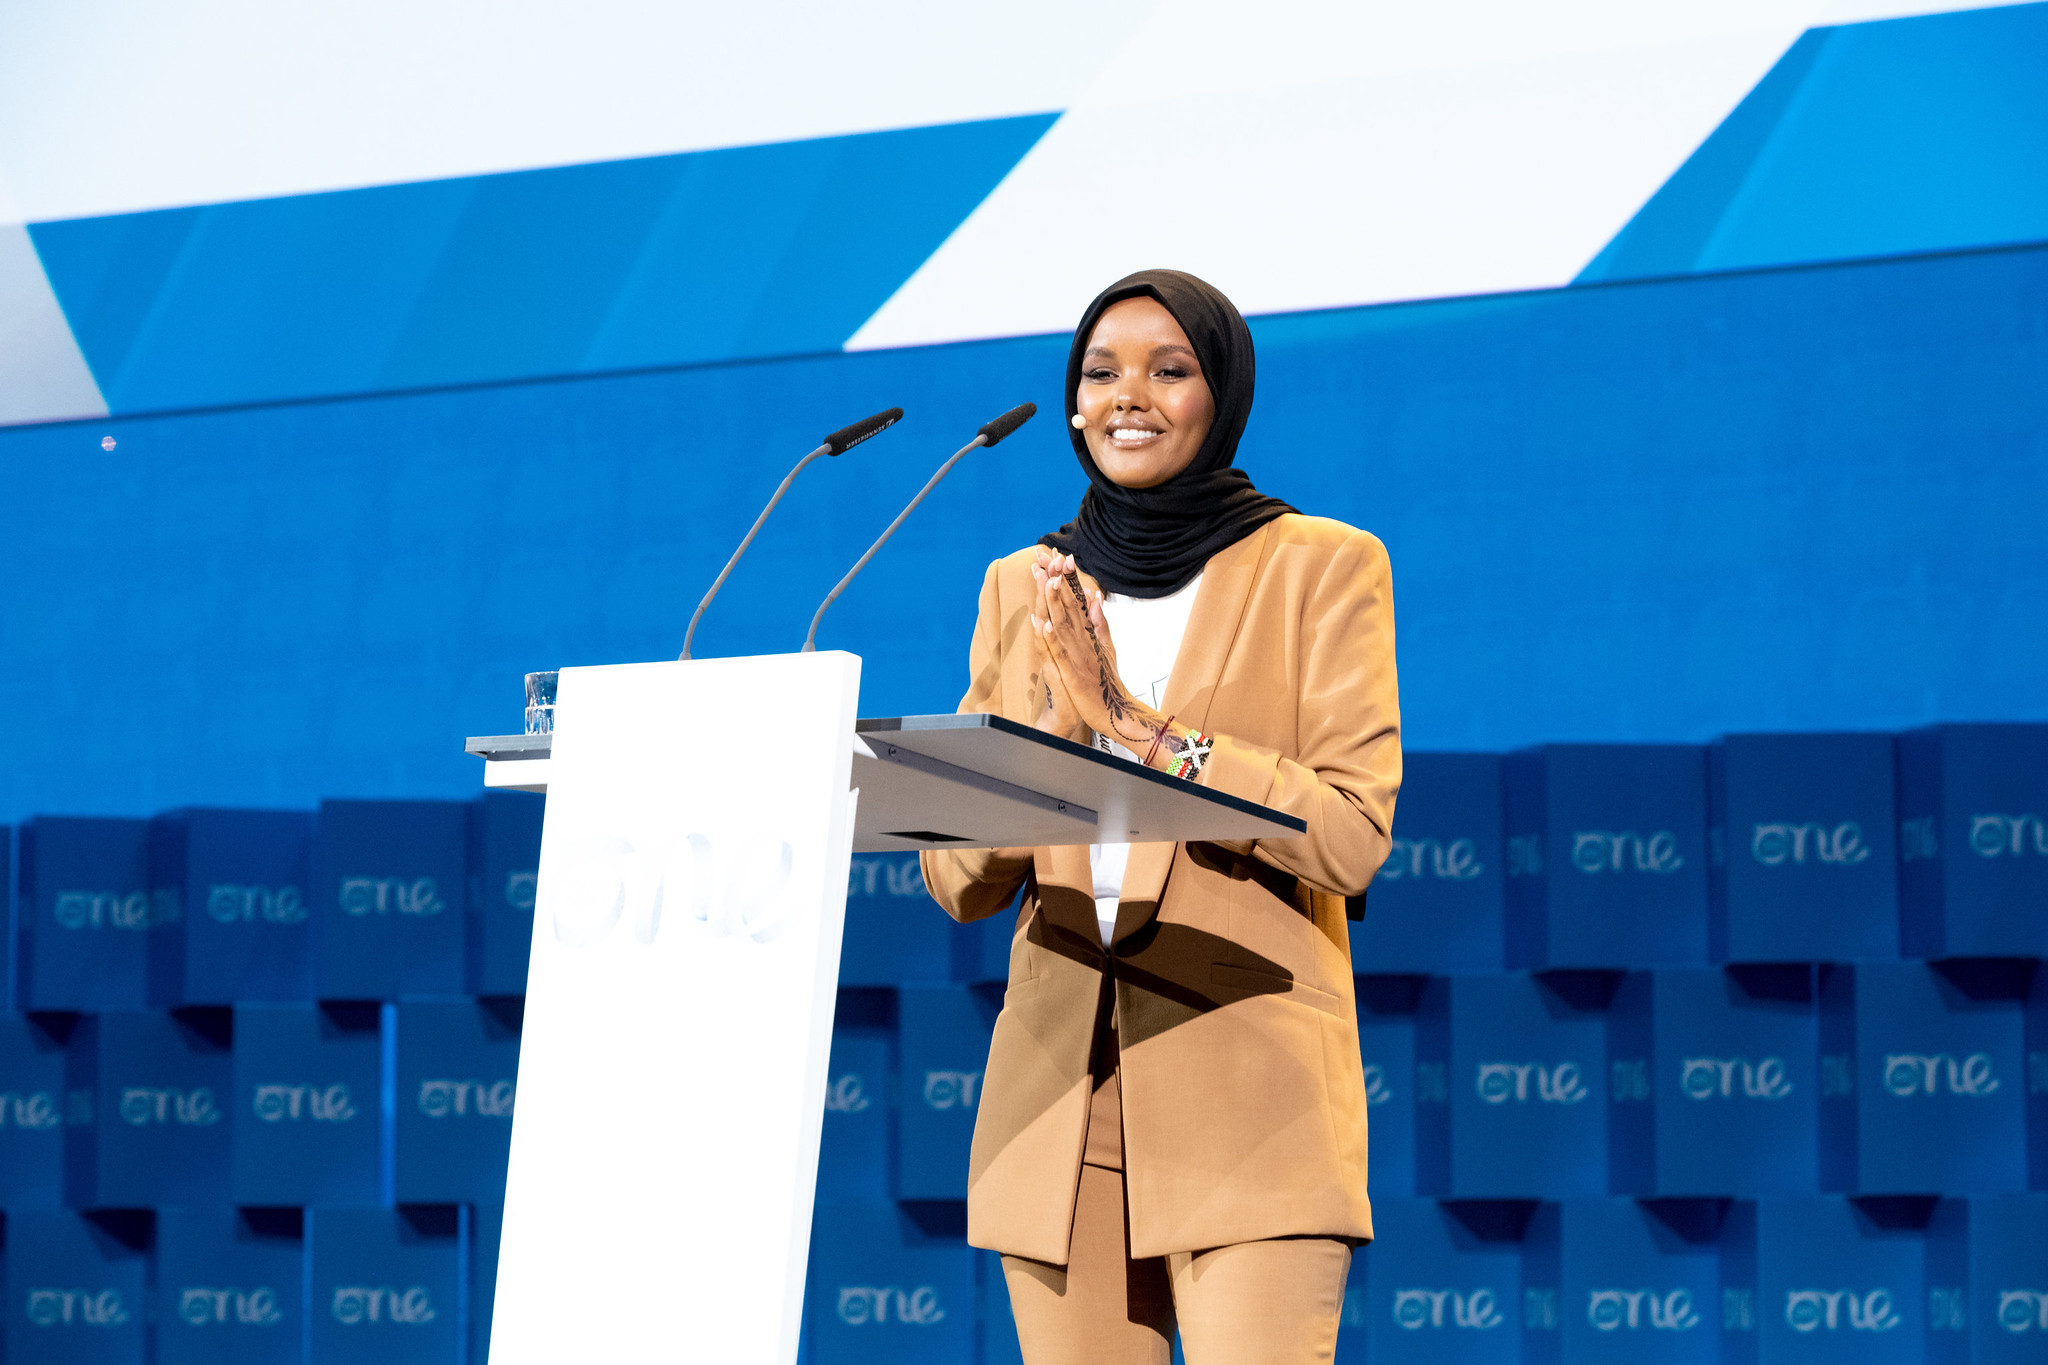 Halima Aden welcomes attendees to the 2021 Munich Summit